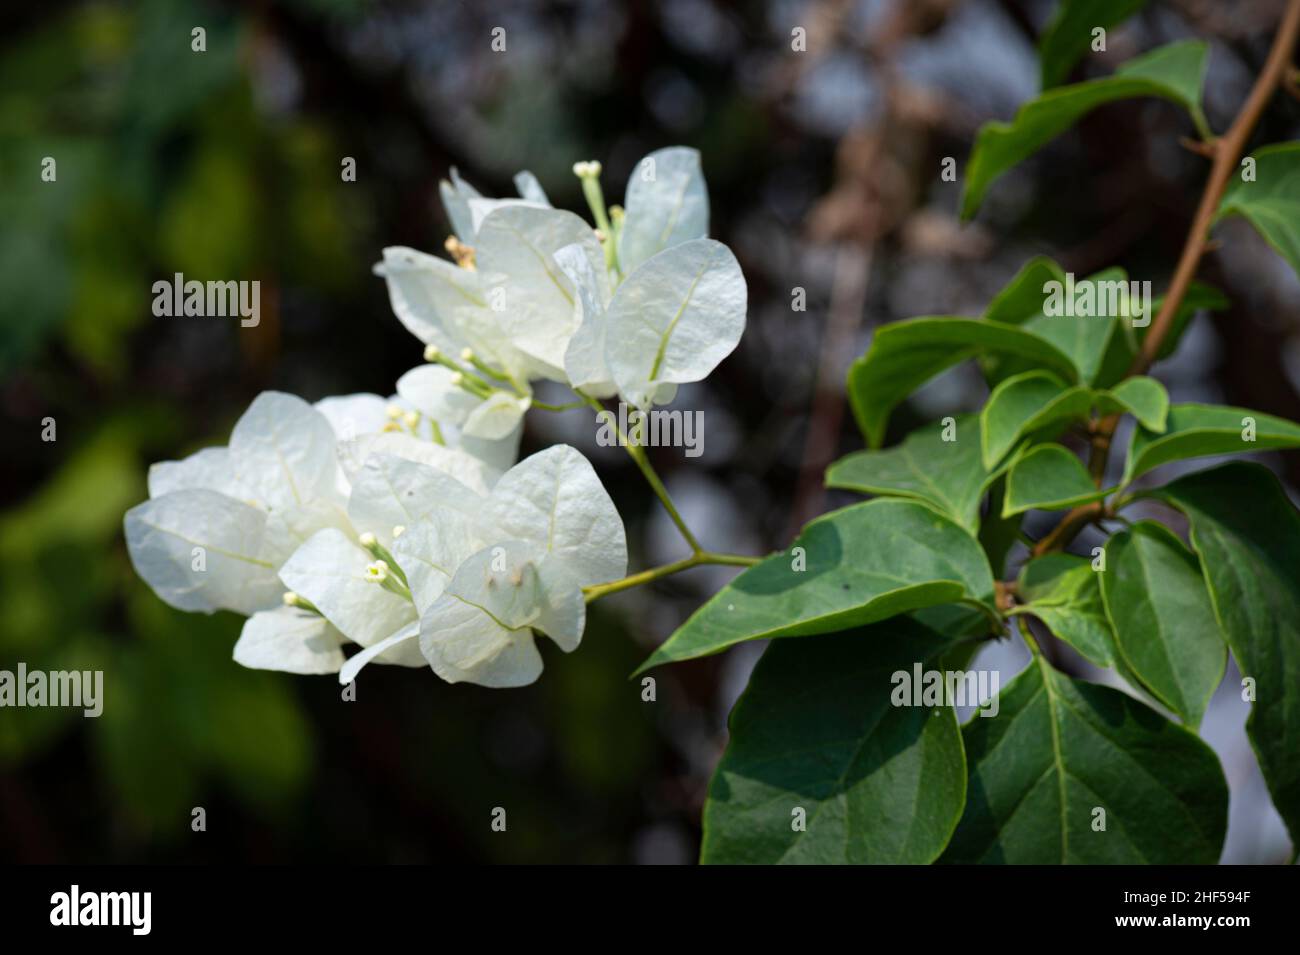 confetti, woody plant, shrub or tree with thorns Stock Photo